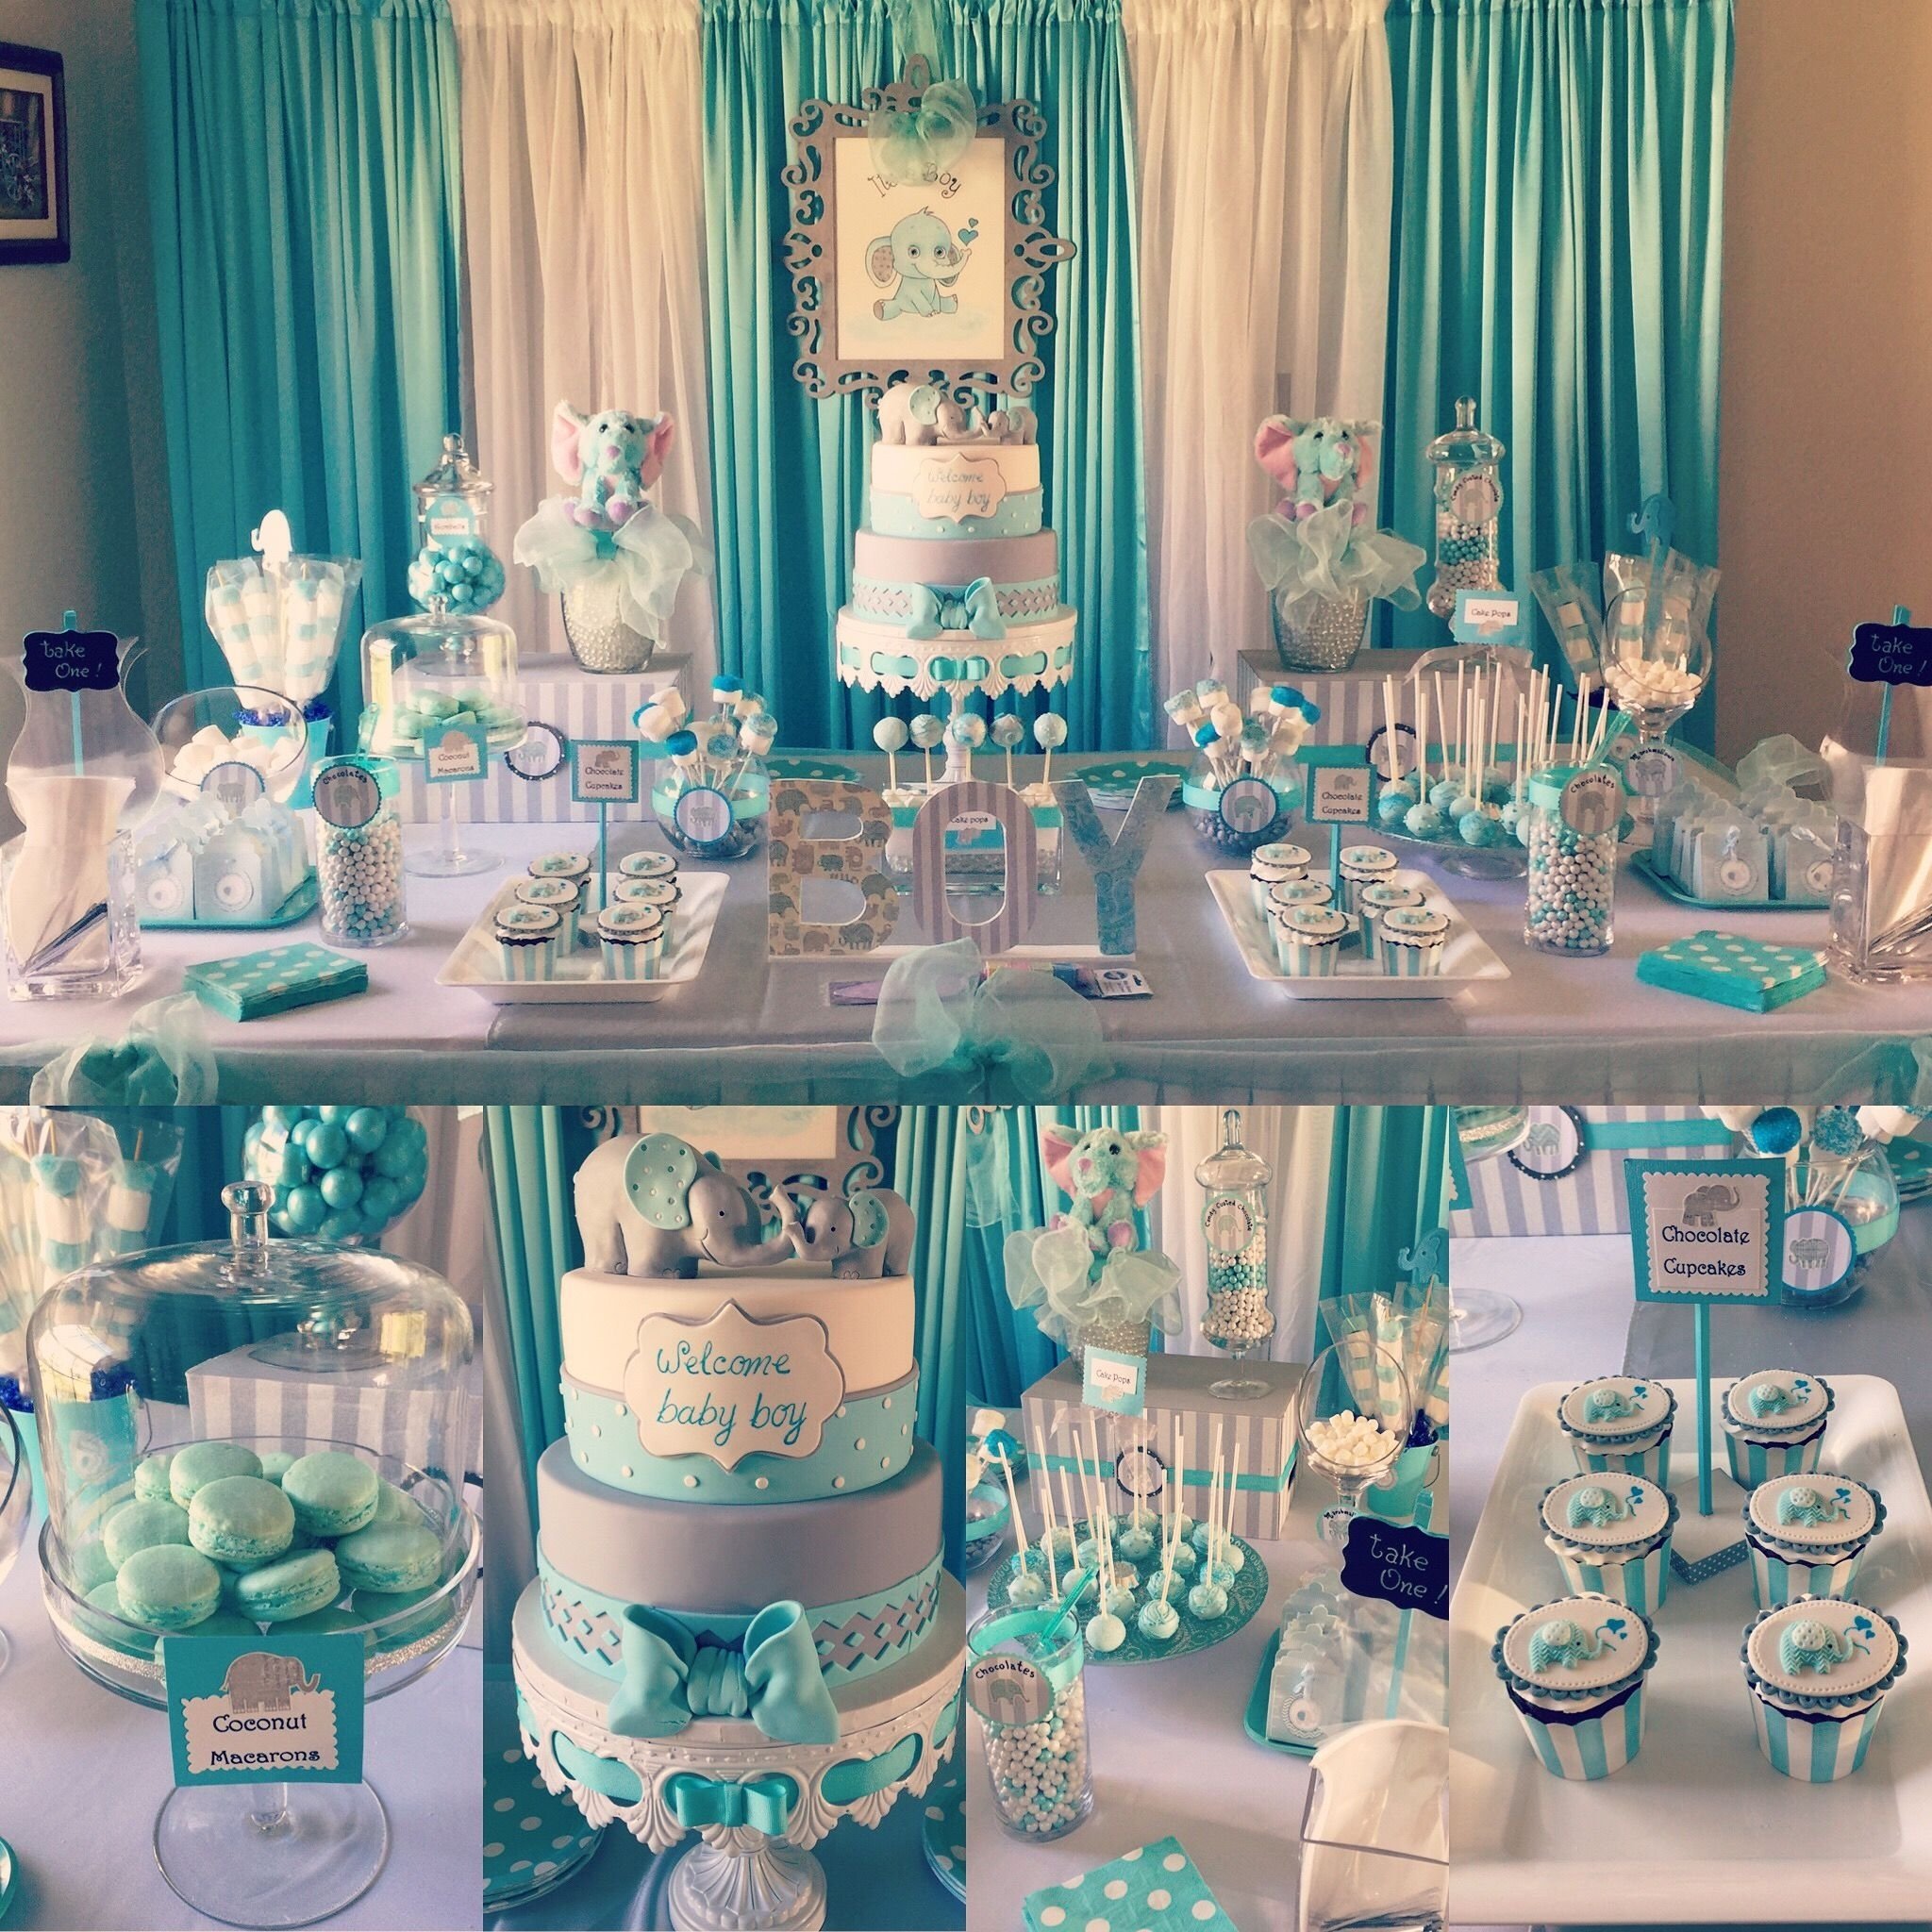 10 Amazing Baby Shower Ideas For Boy unique gender reveal party ideas that wont empty your wallet 15 2022